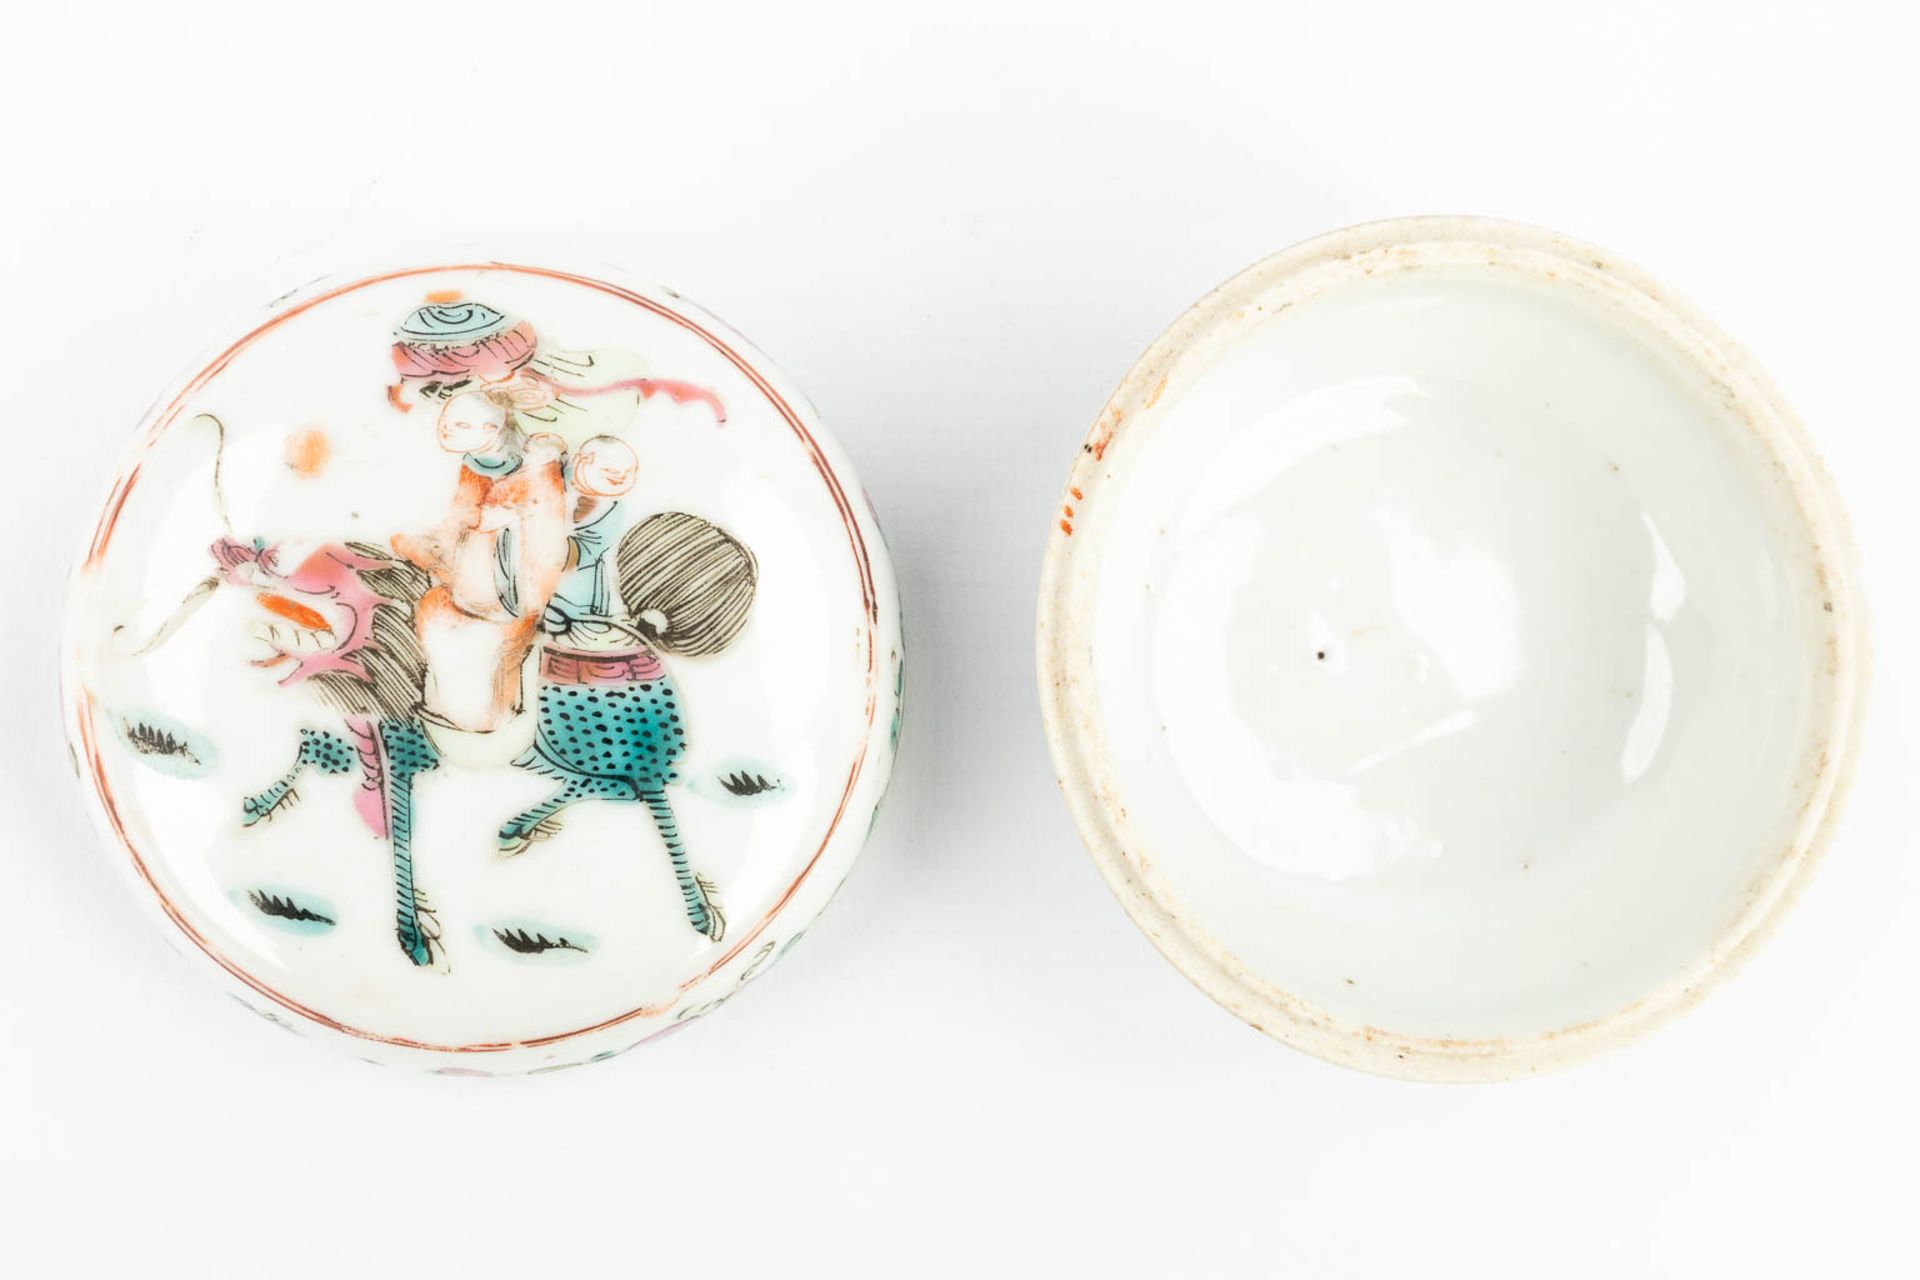 AÊset of 2 Chinese pots with lid, with hand-painted decor and made of porcelain (5 x 8,5 cm) - Image 10 of 18